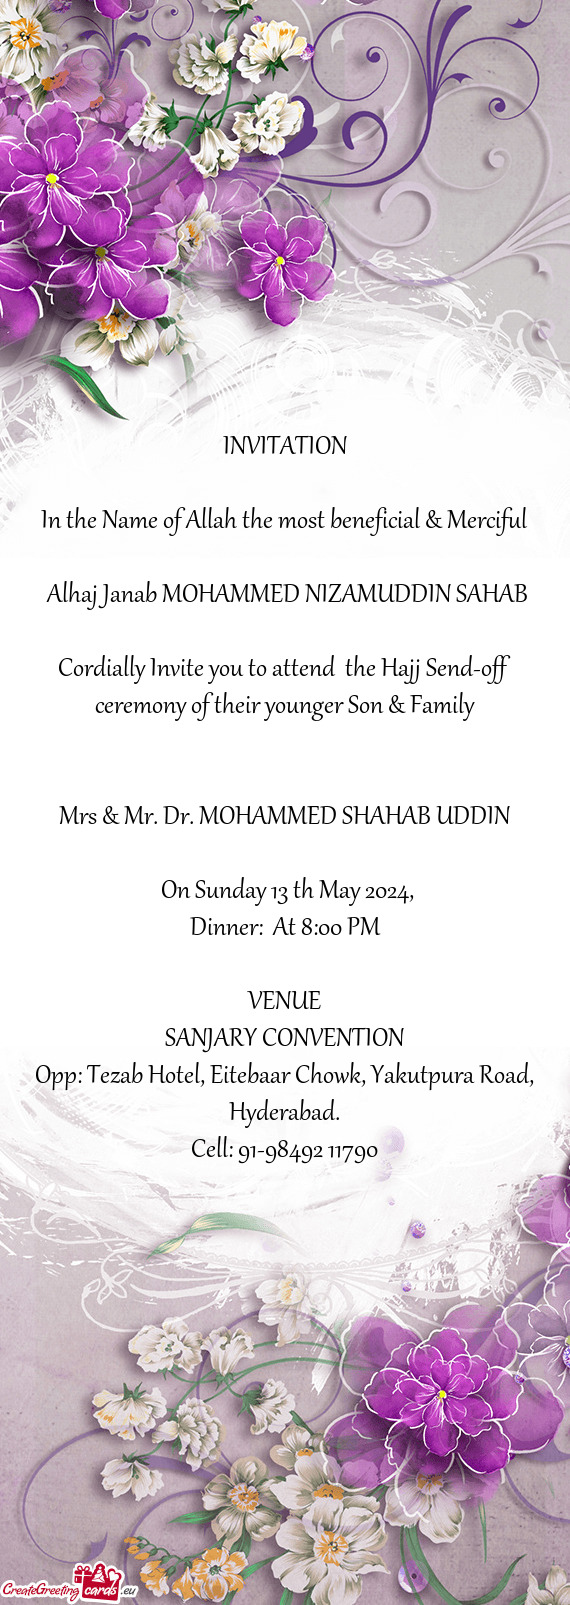 Cordially Invite you to attend the Hajj Send-off ceremony of their younger Son & Family